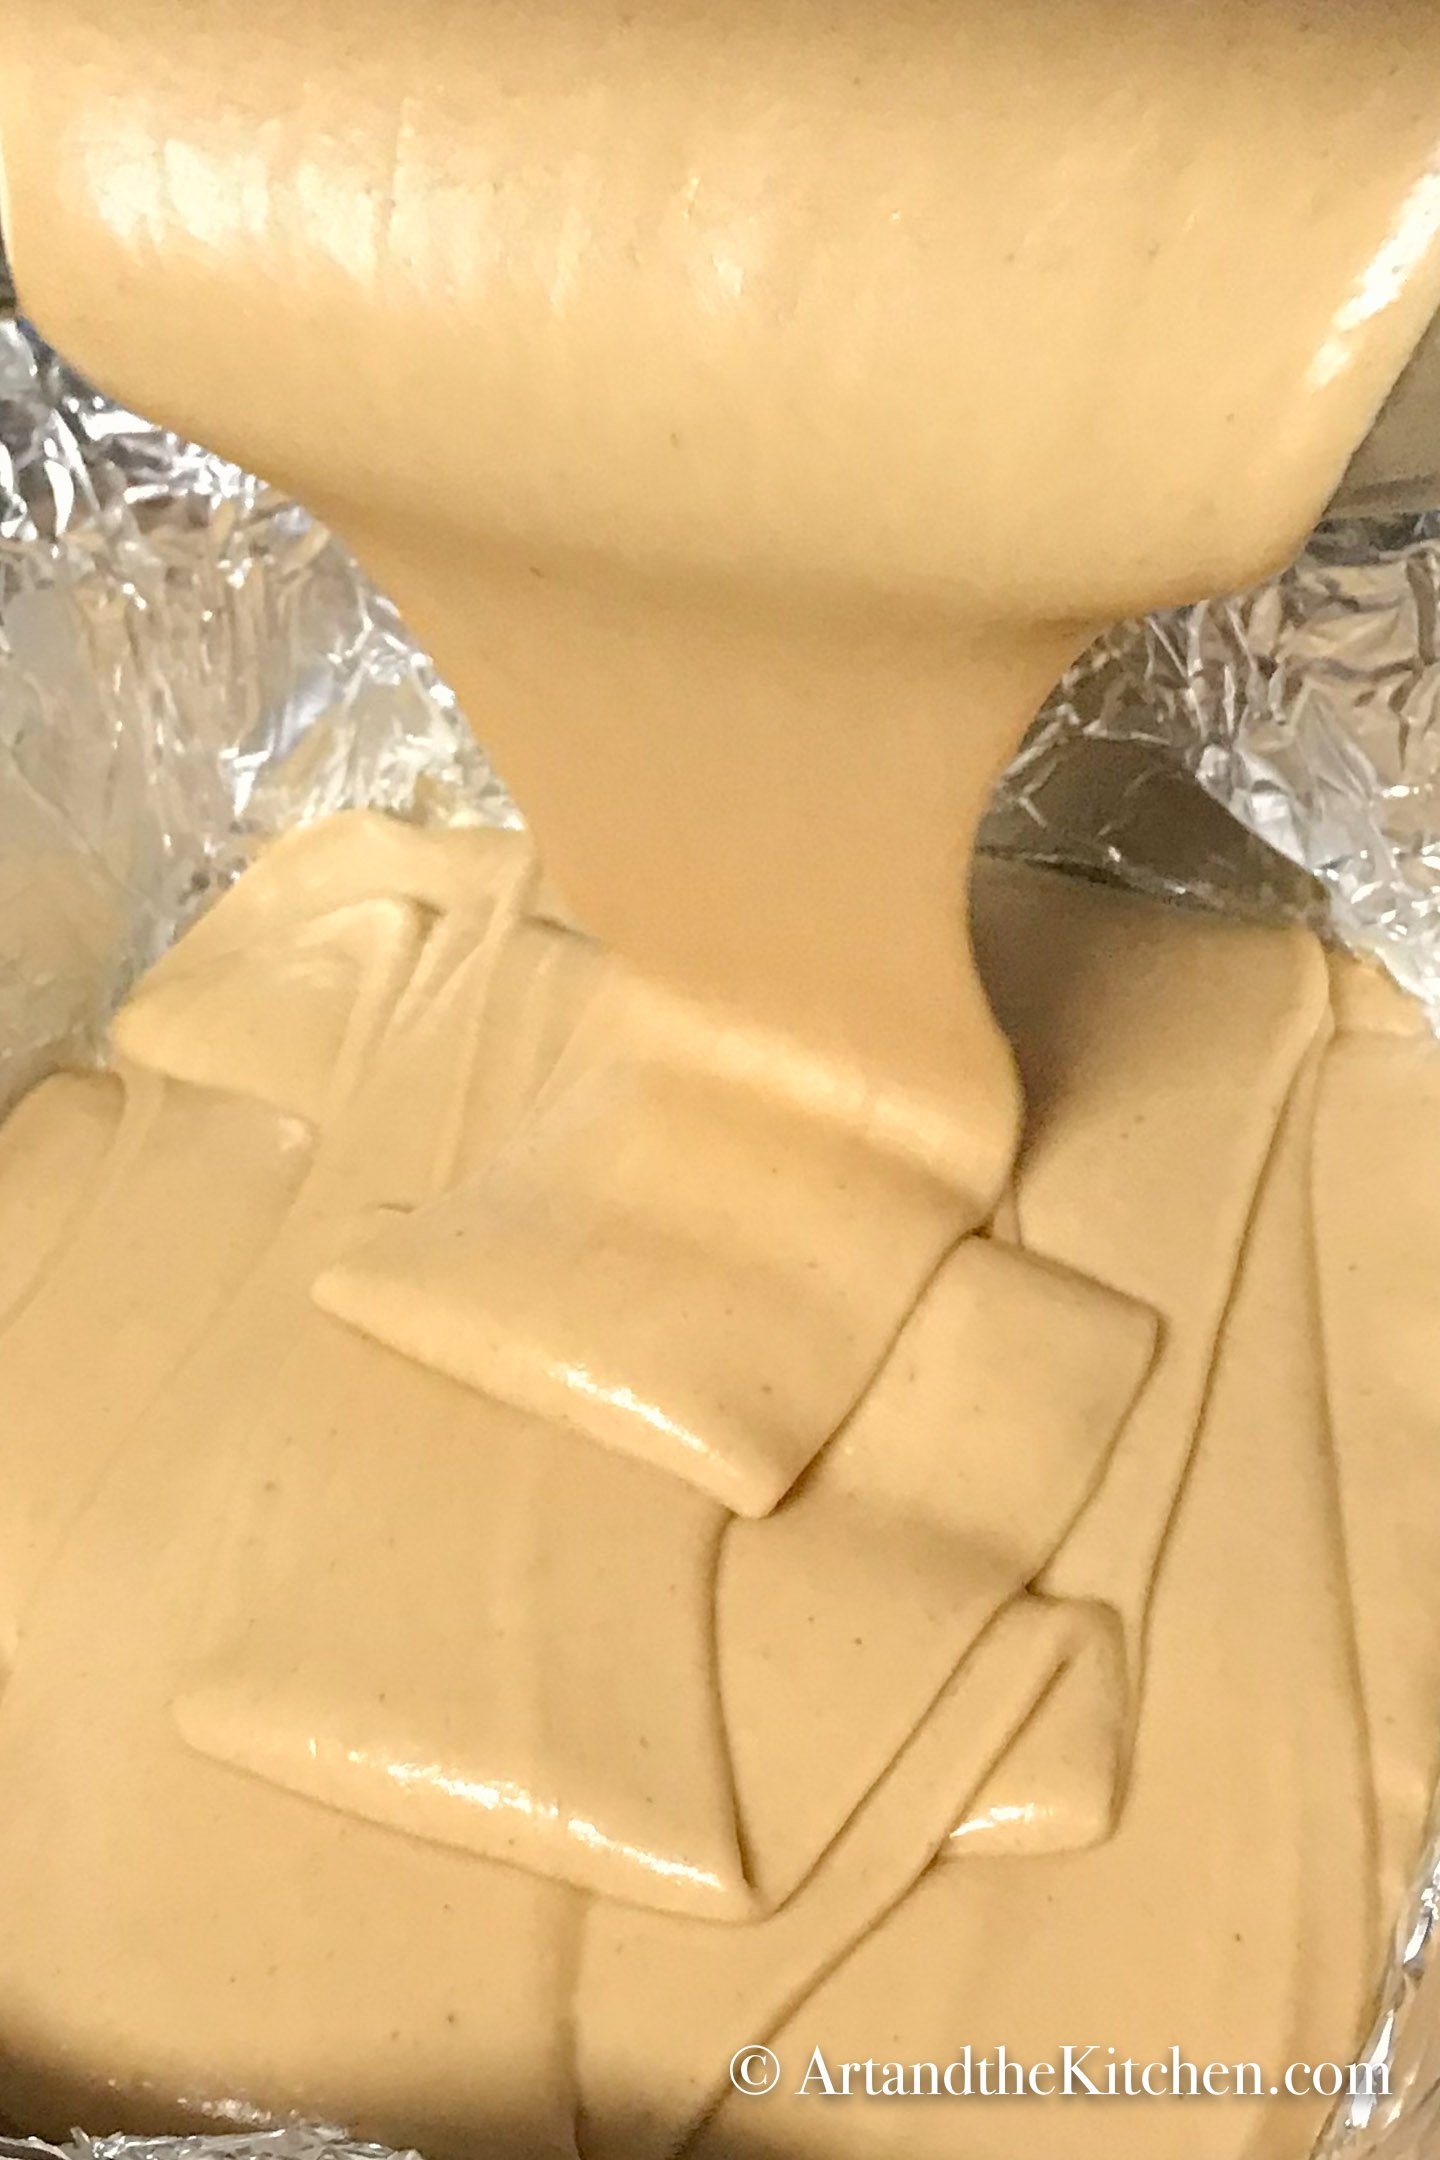 Peanut butter fudge being poured into foil lined baking pan.